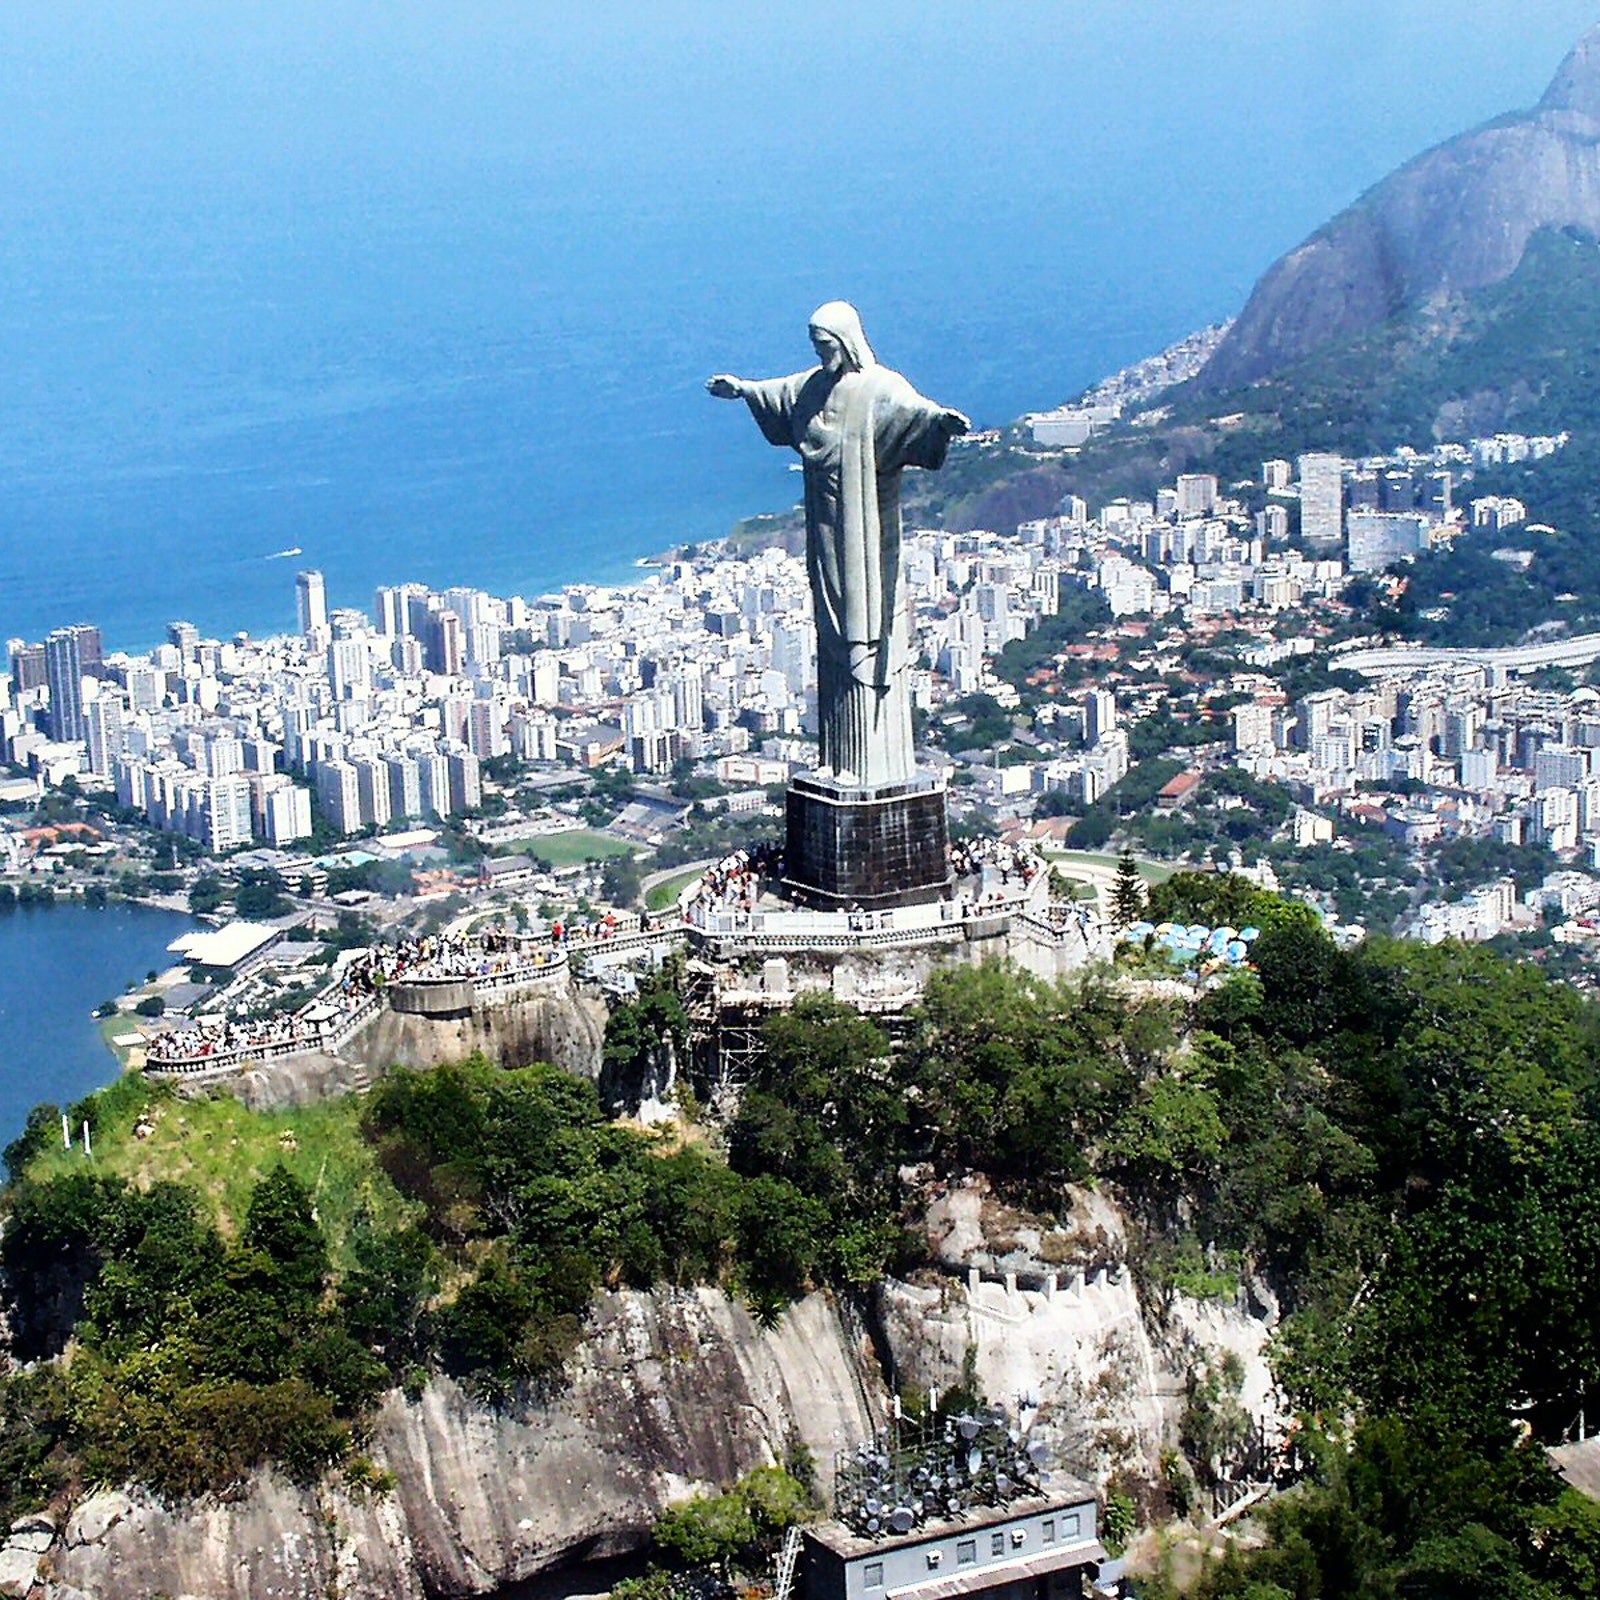 Corcovado Train & Christ the Redeemer in Brazil